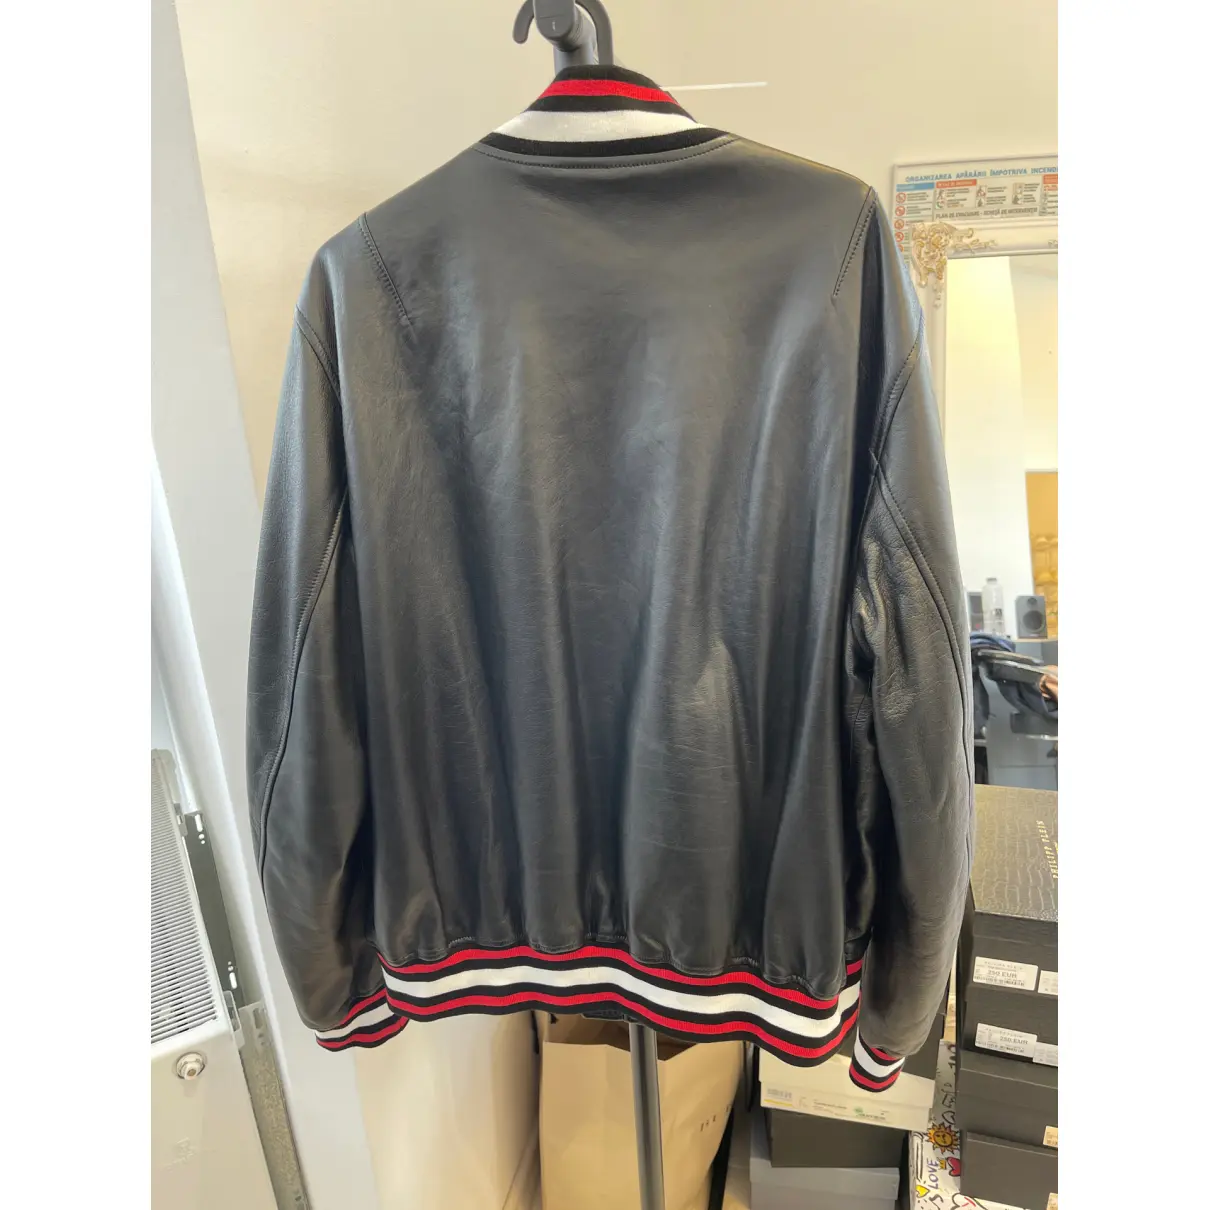 Buy Givenchy Leather jacket online